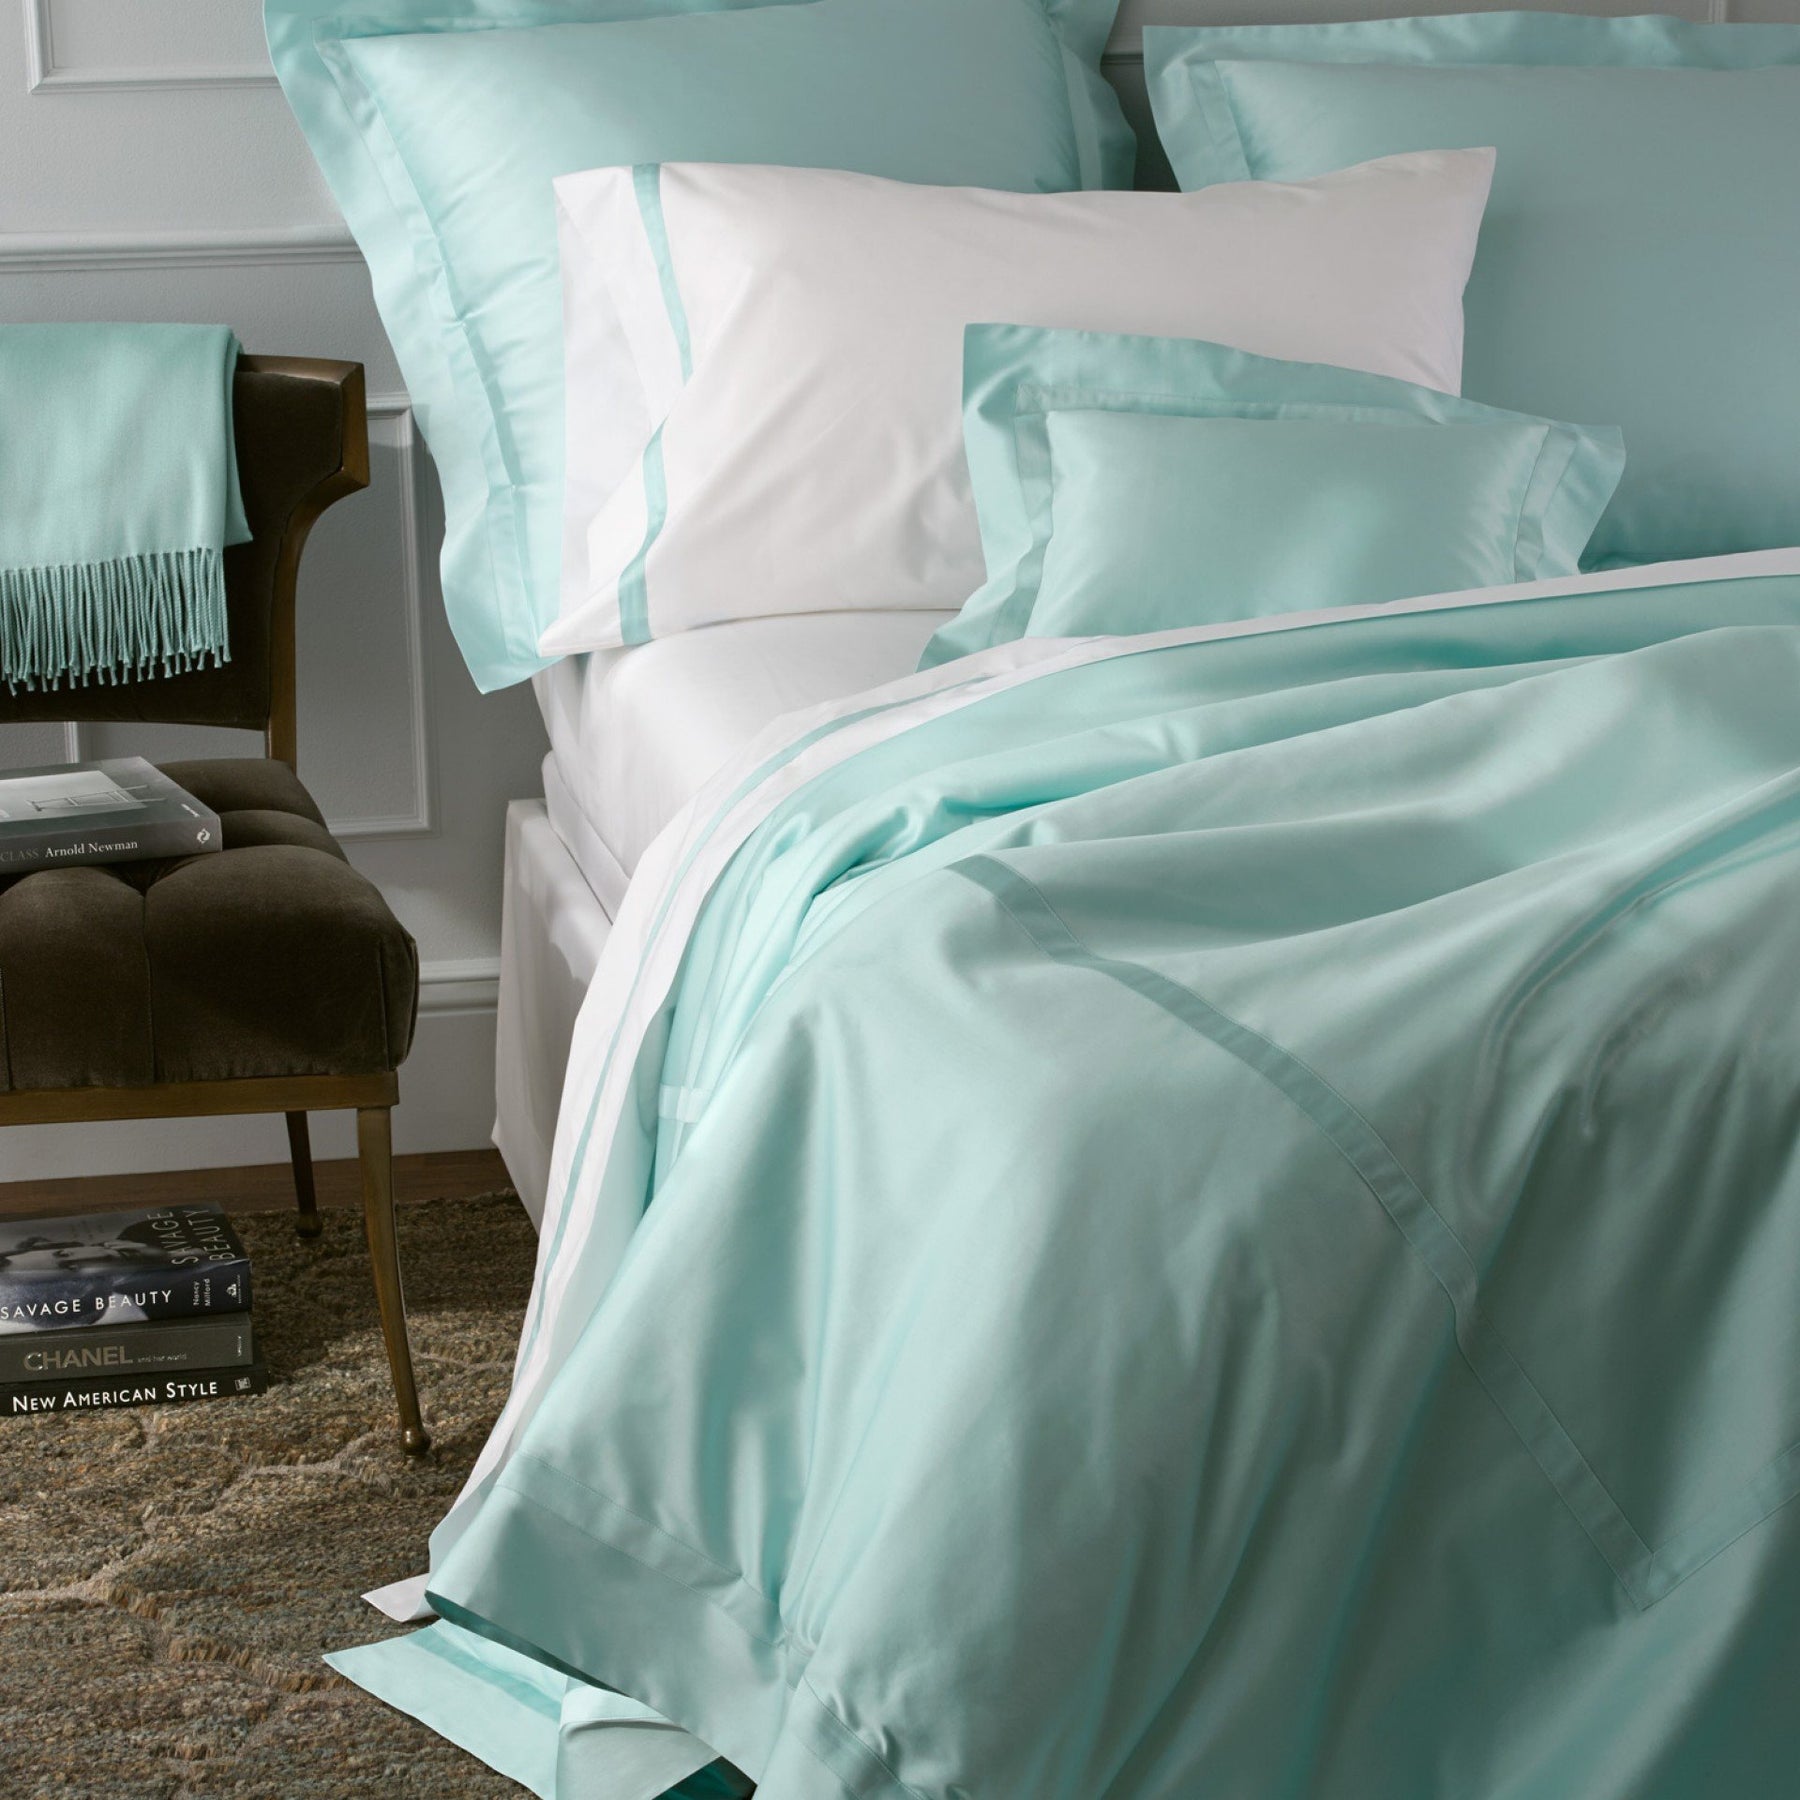 Nocturne Bed Linens - Pioneer Linens